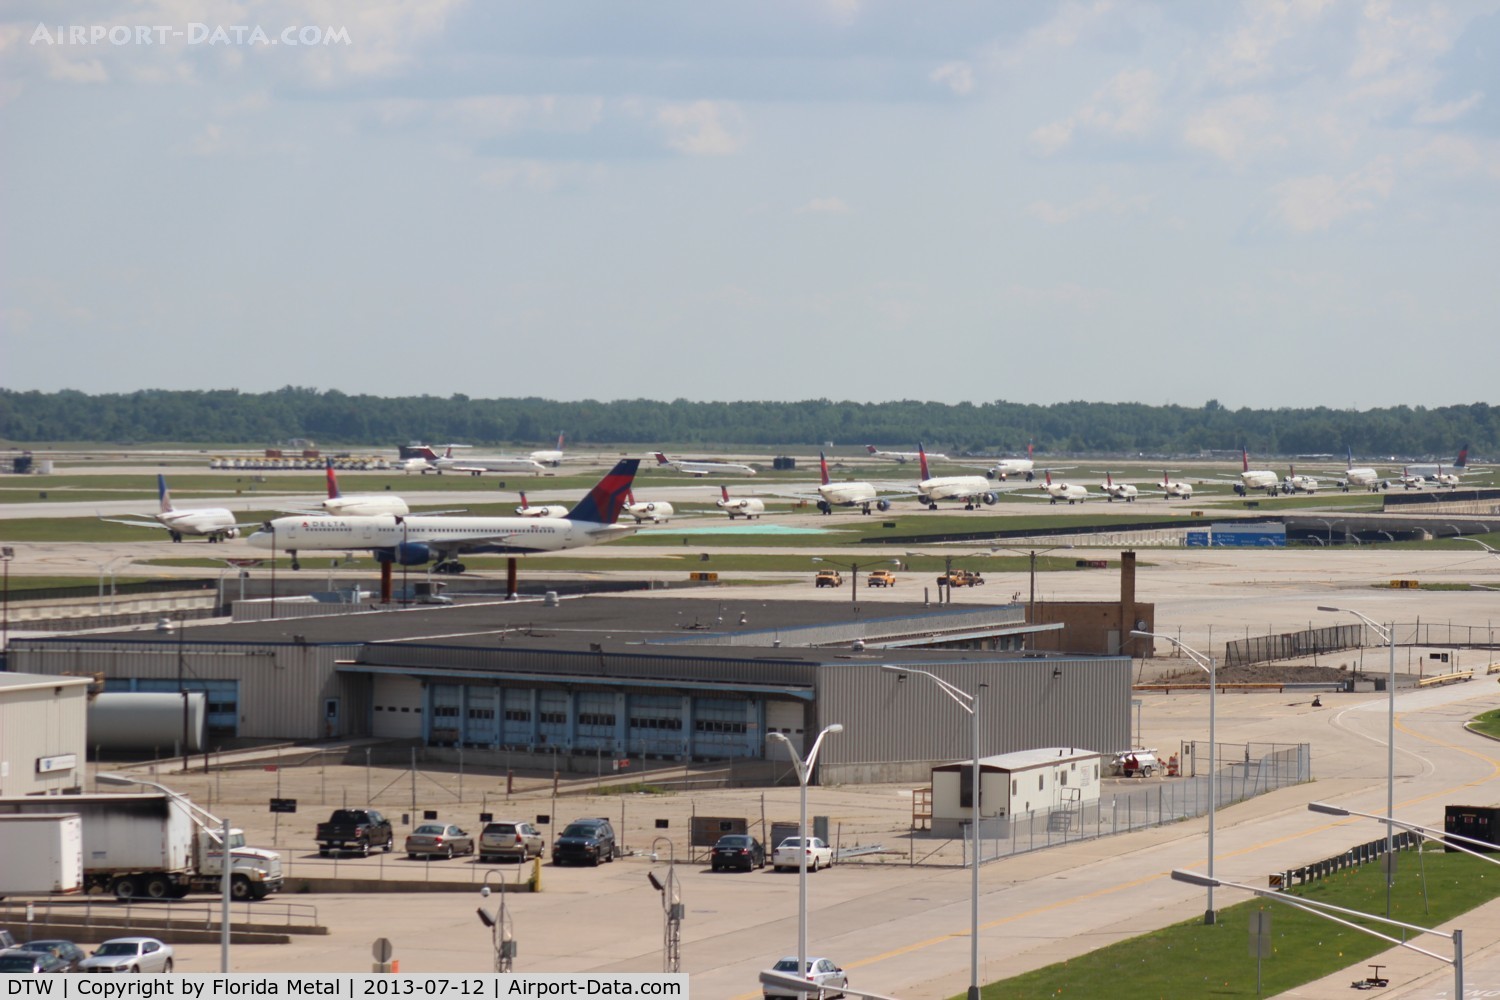 Detroit Metropolitan Wayne County Airport (DTW) - Line up of about 28 planes waiting to depart on Runway 3L